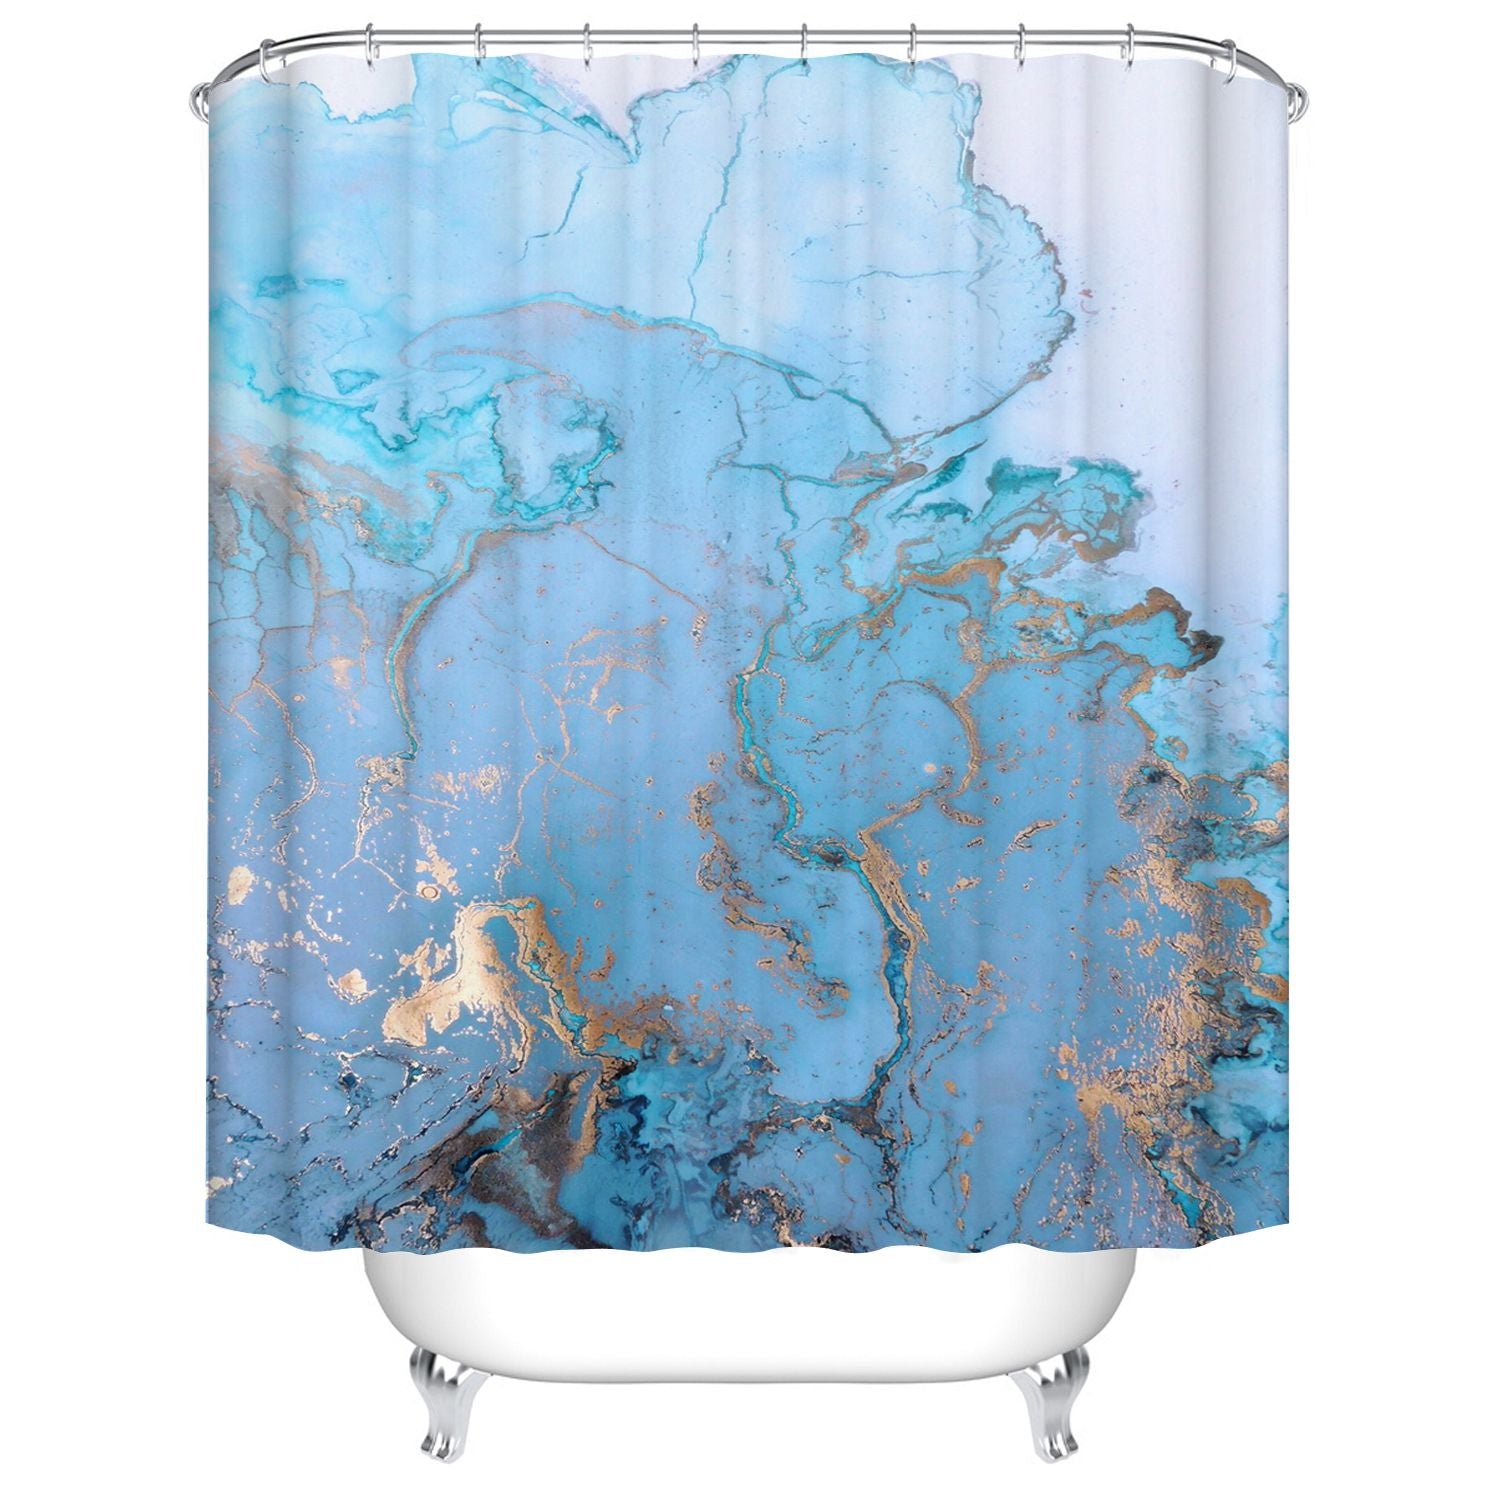 Cracked Lines Texture Golden Blue Marble Shower Curtain